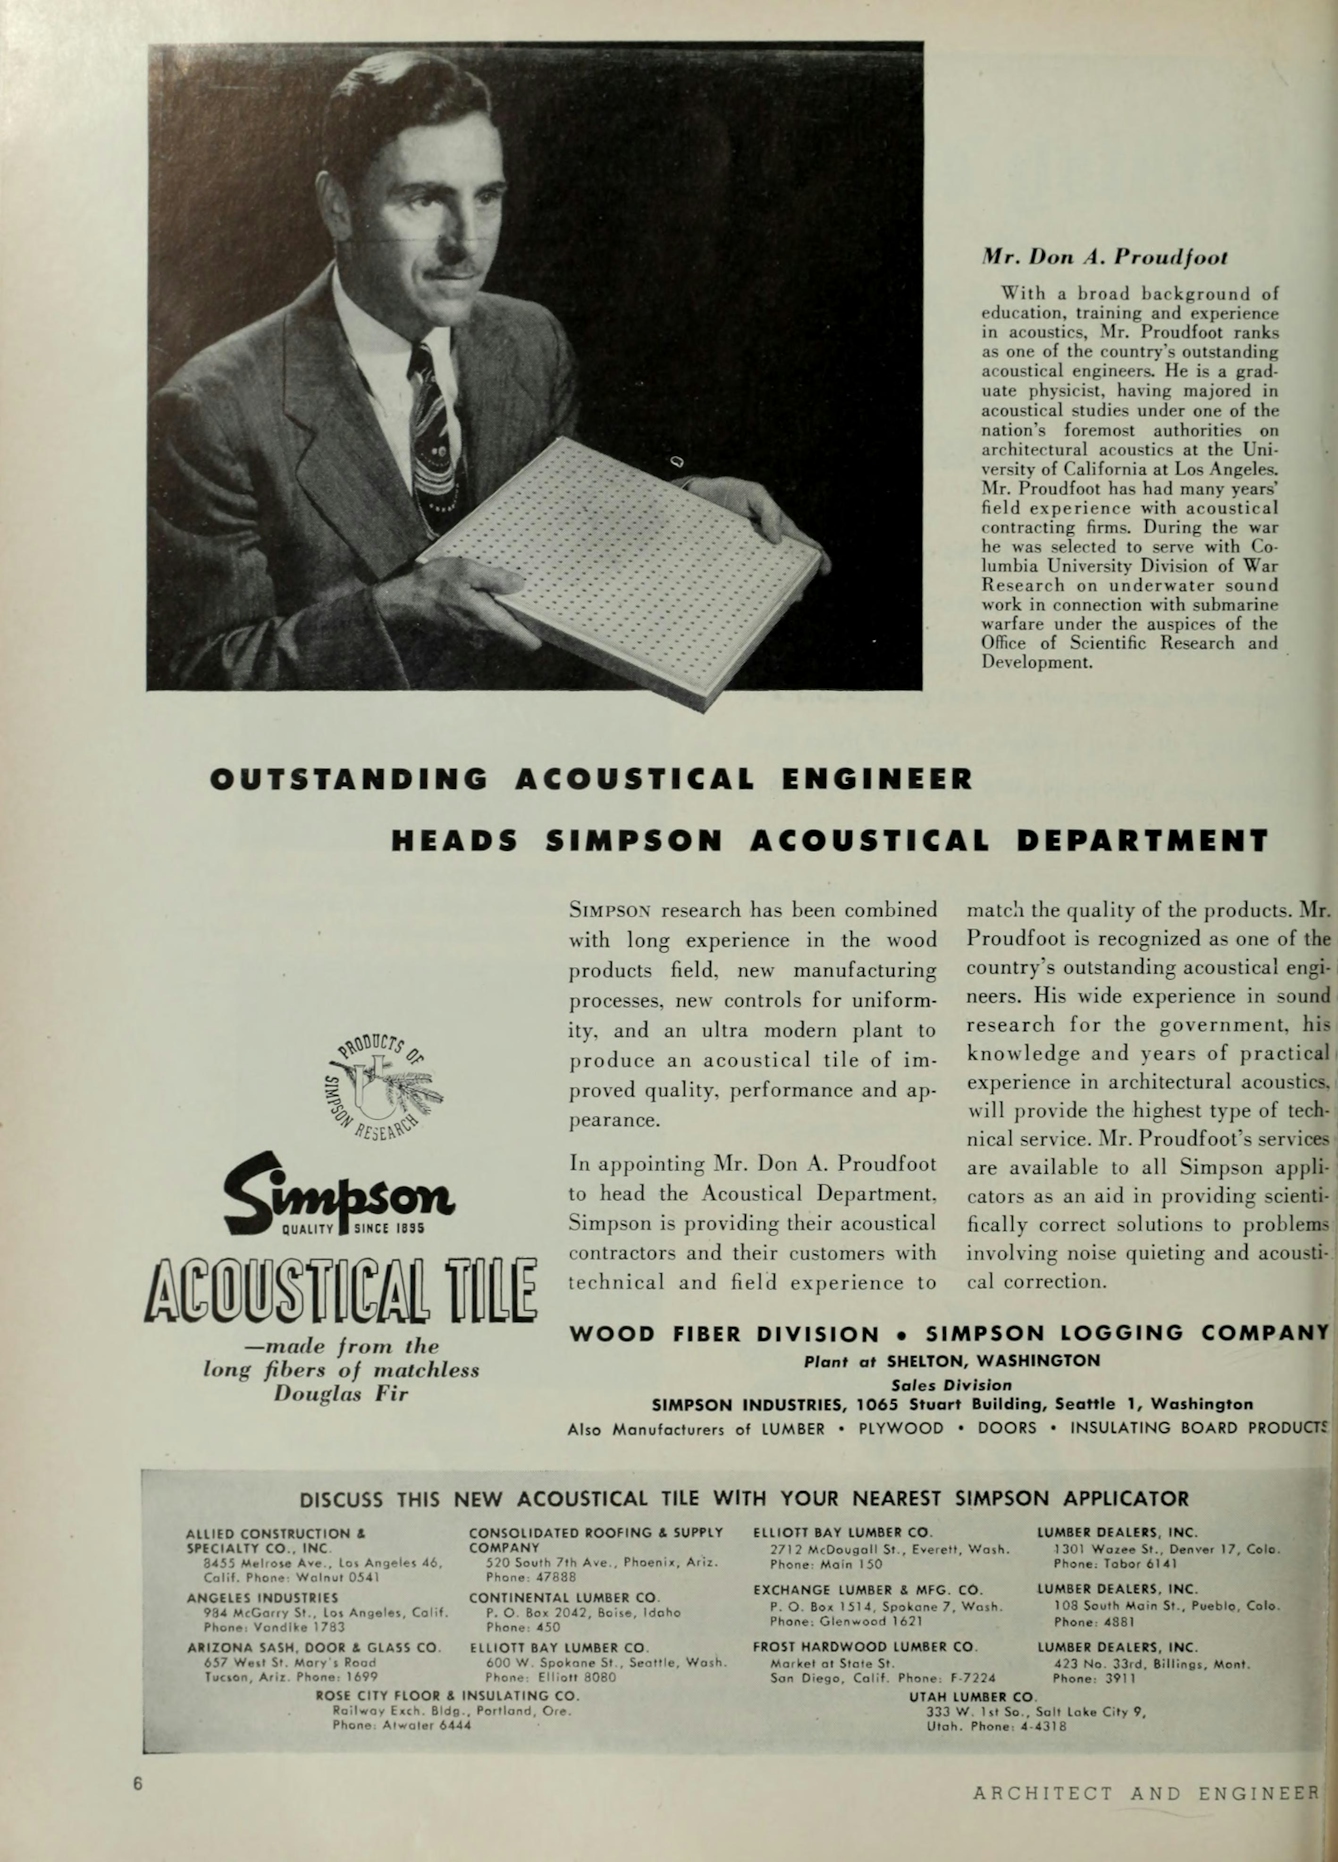 Scanned image from a black and white 'Architect and Engineer' magazine page. Image at the top shows a man, named as Mr Don A. Proudfoot, holding a piece of soundproofing material called the Simpson Acoustical Tile.